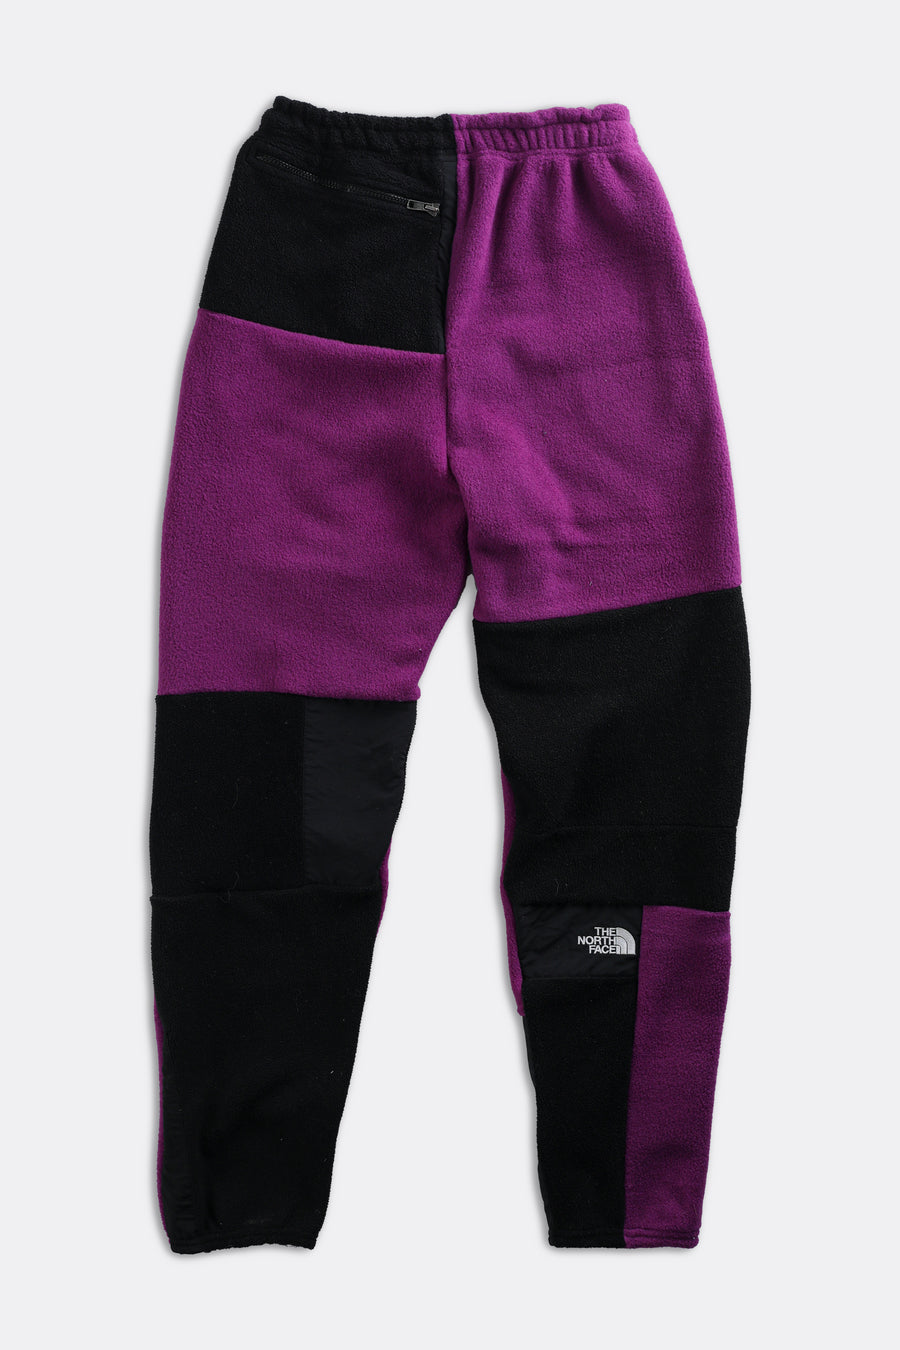 The North Face Fleece Pants